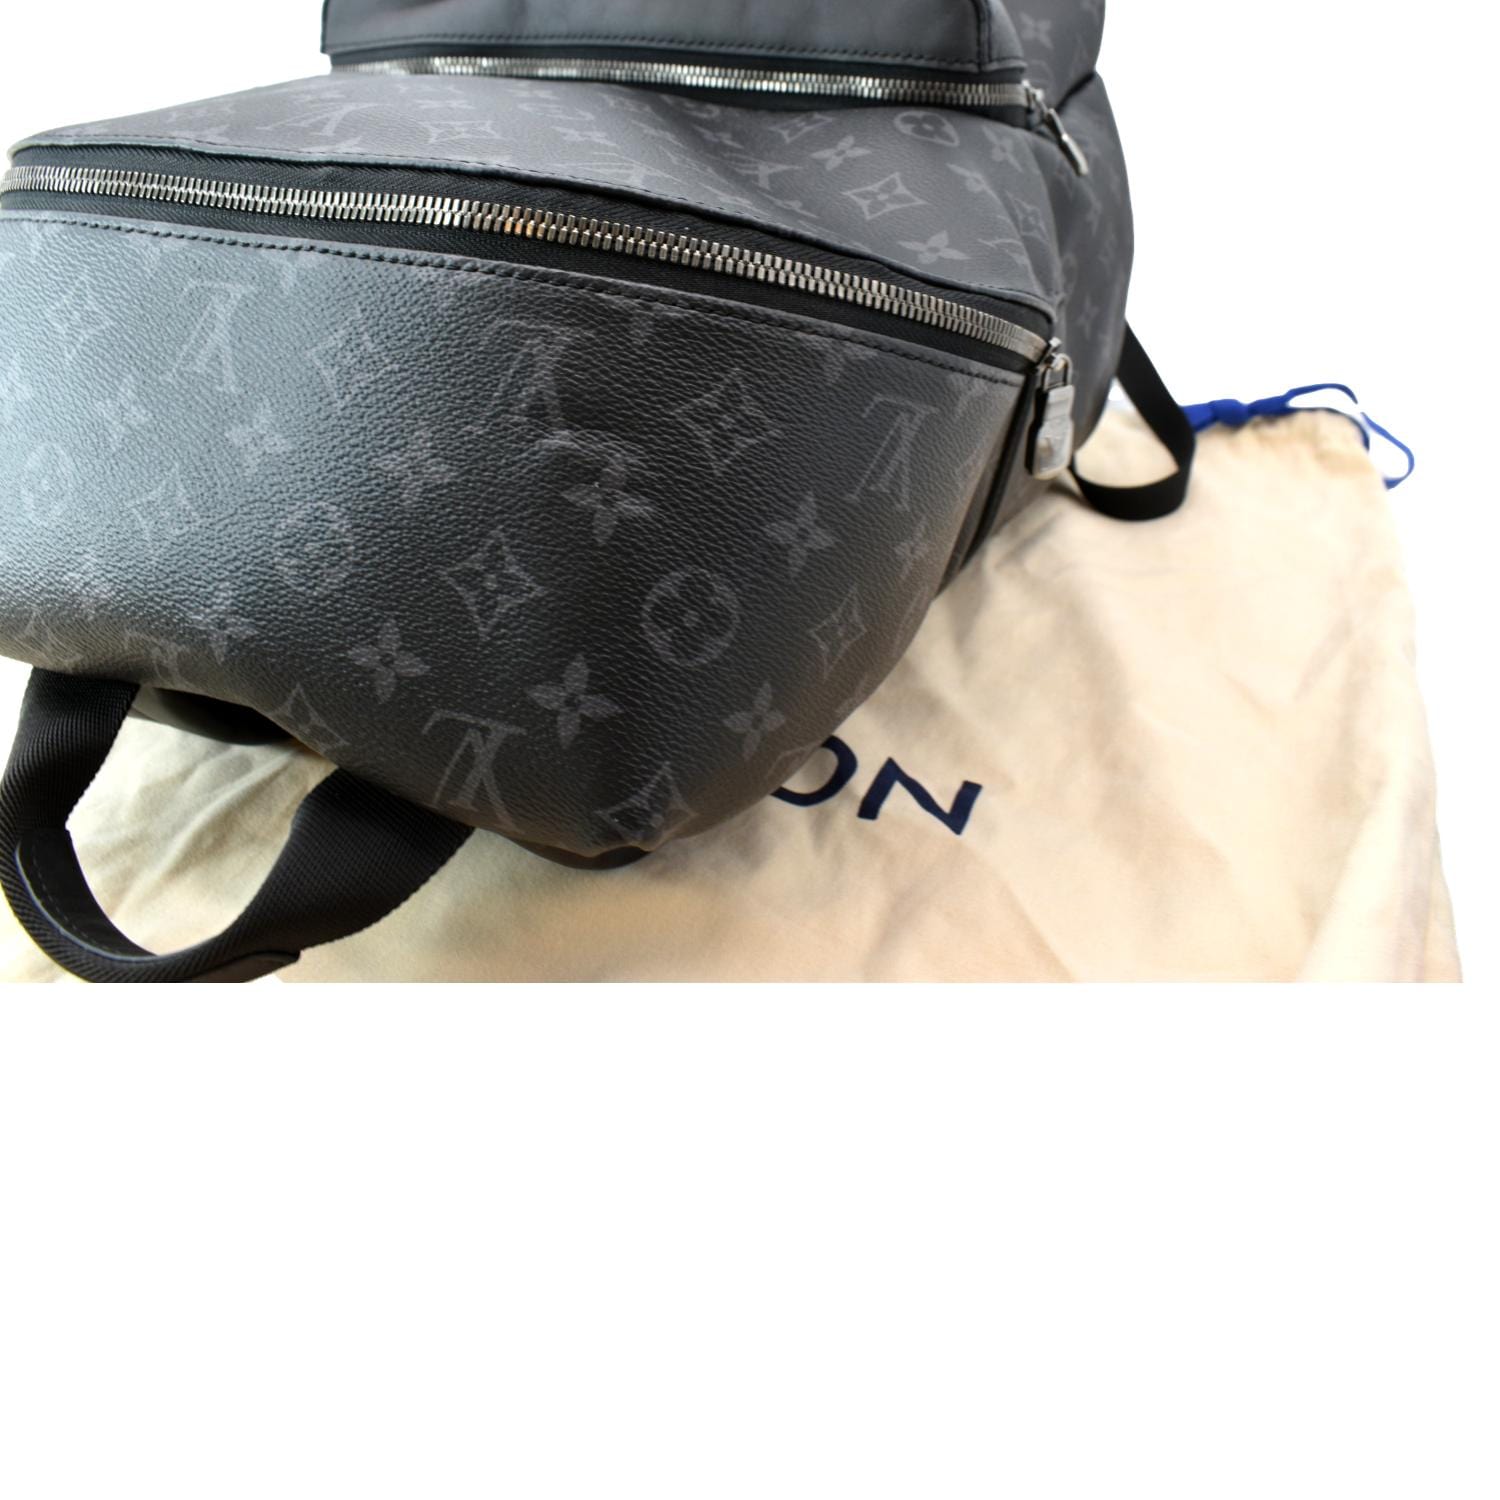 Products By Louis Vuitton : Discovery Messenger Pm